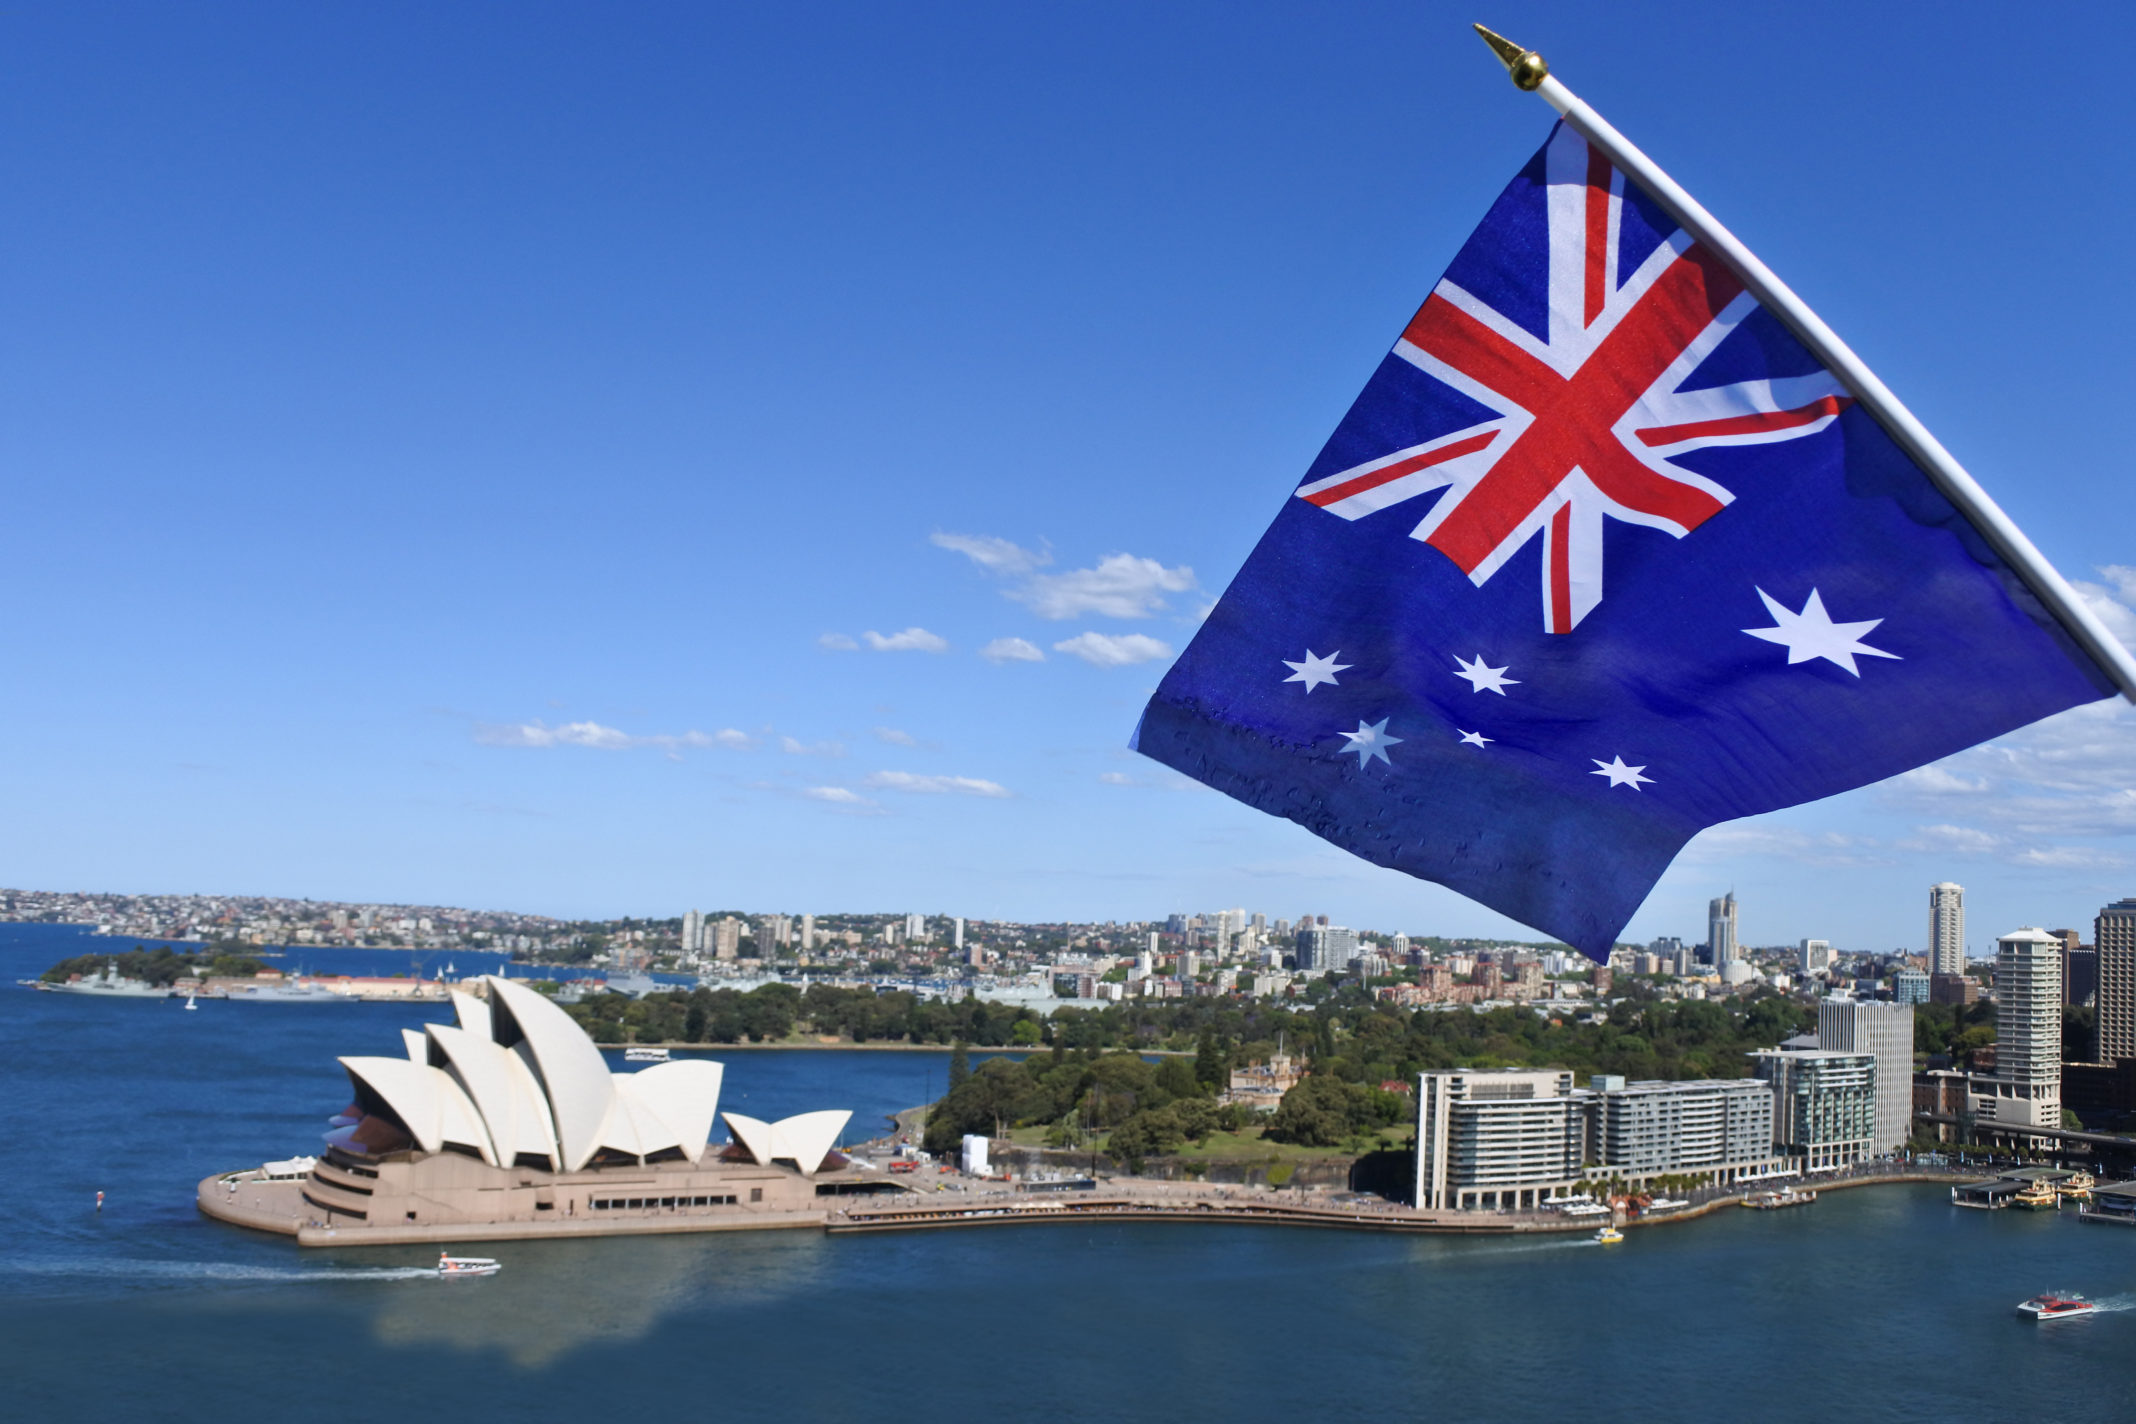 The,National,Flag,Of,Australia,Flies,Above,Sydney,Harbor,And